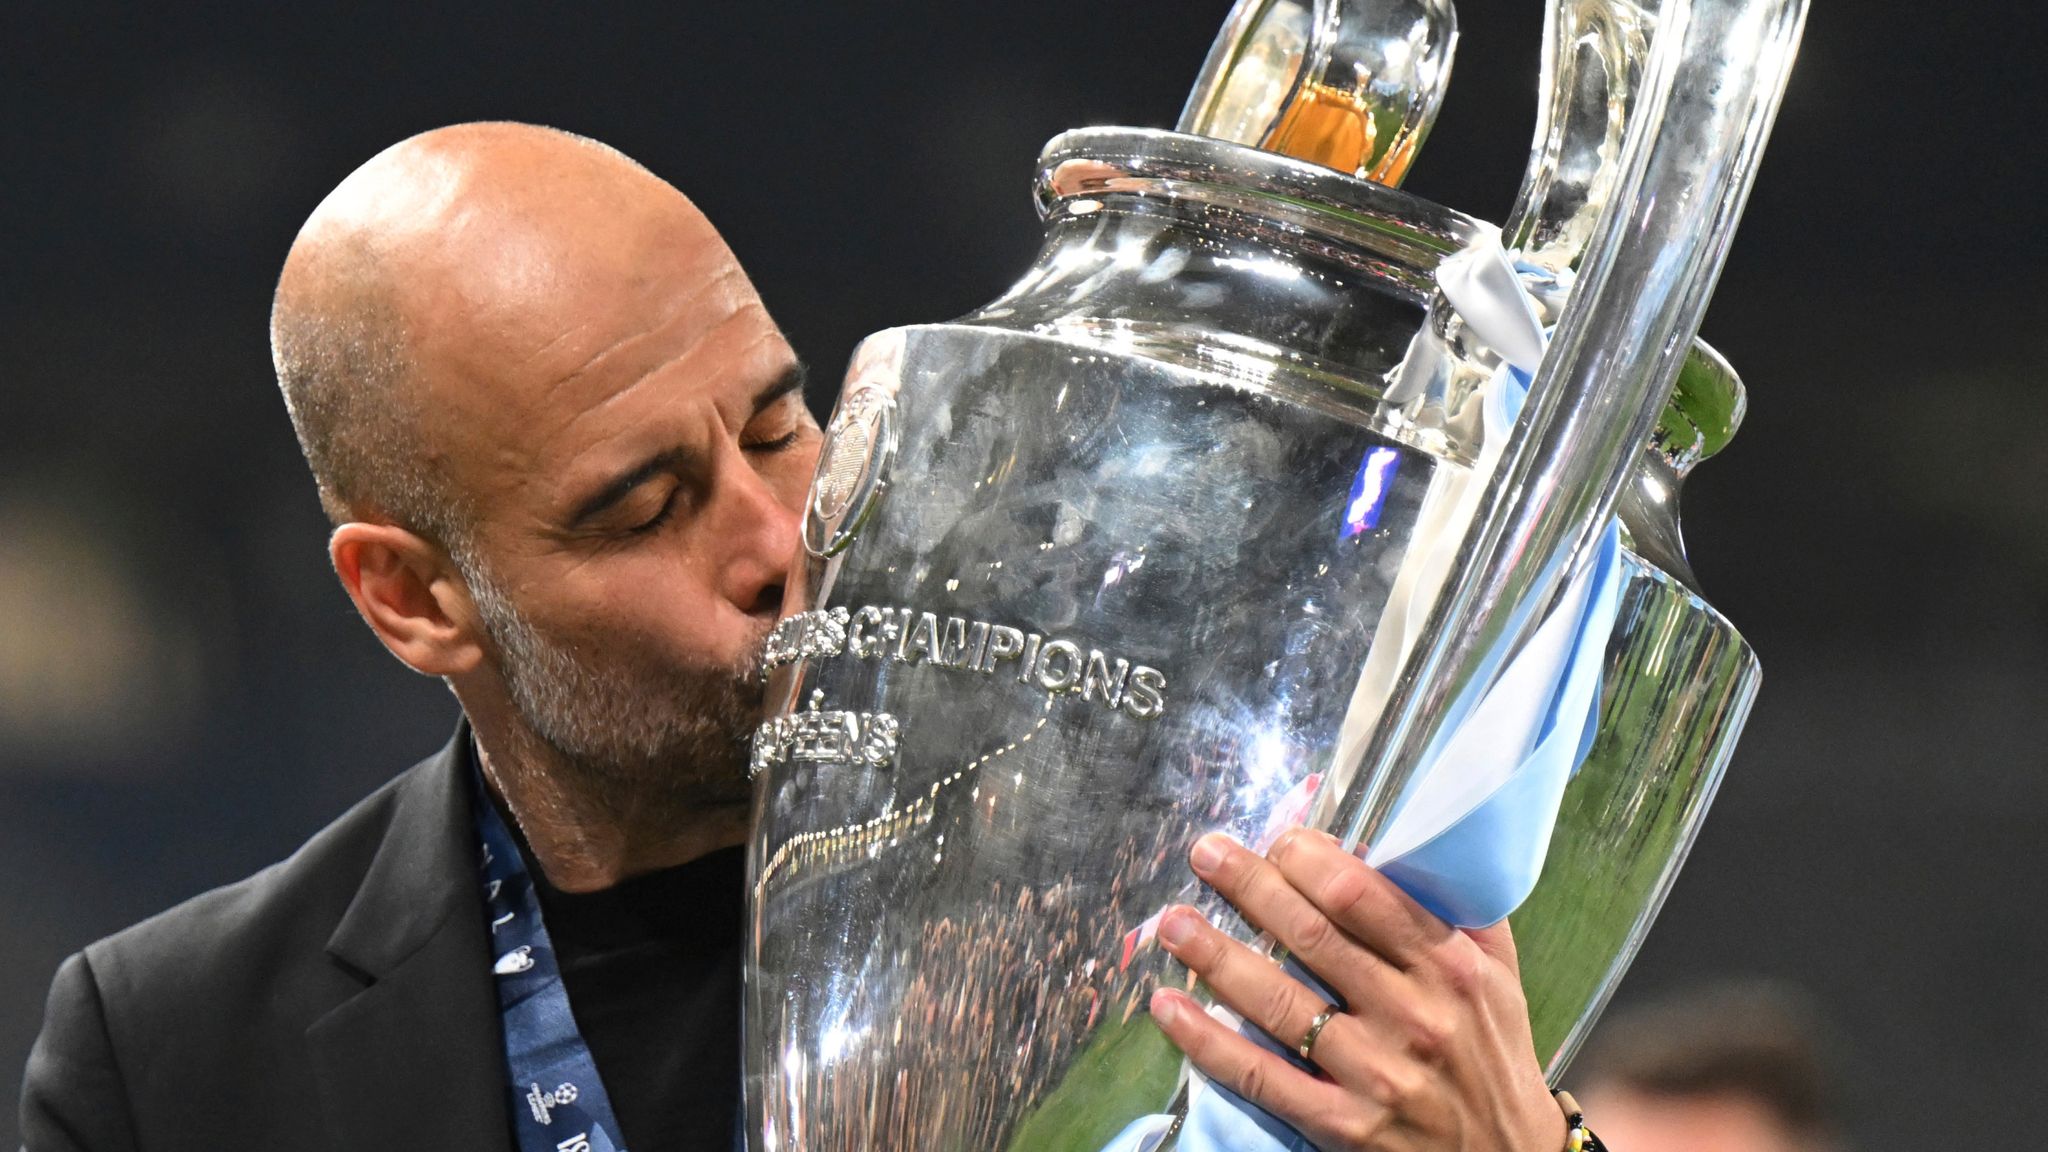 What happens if Girona get into the Champions League? Man City